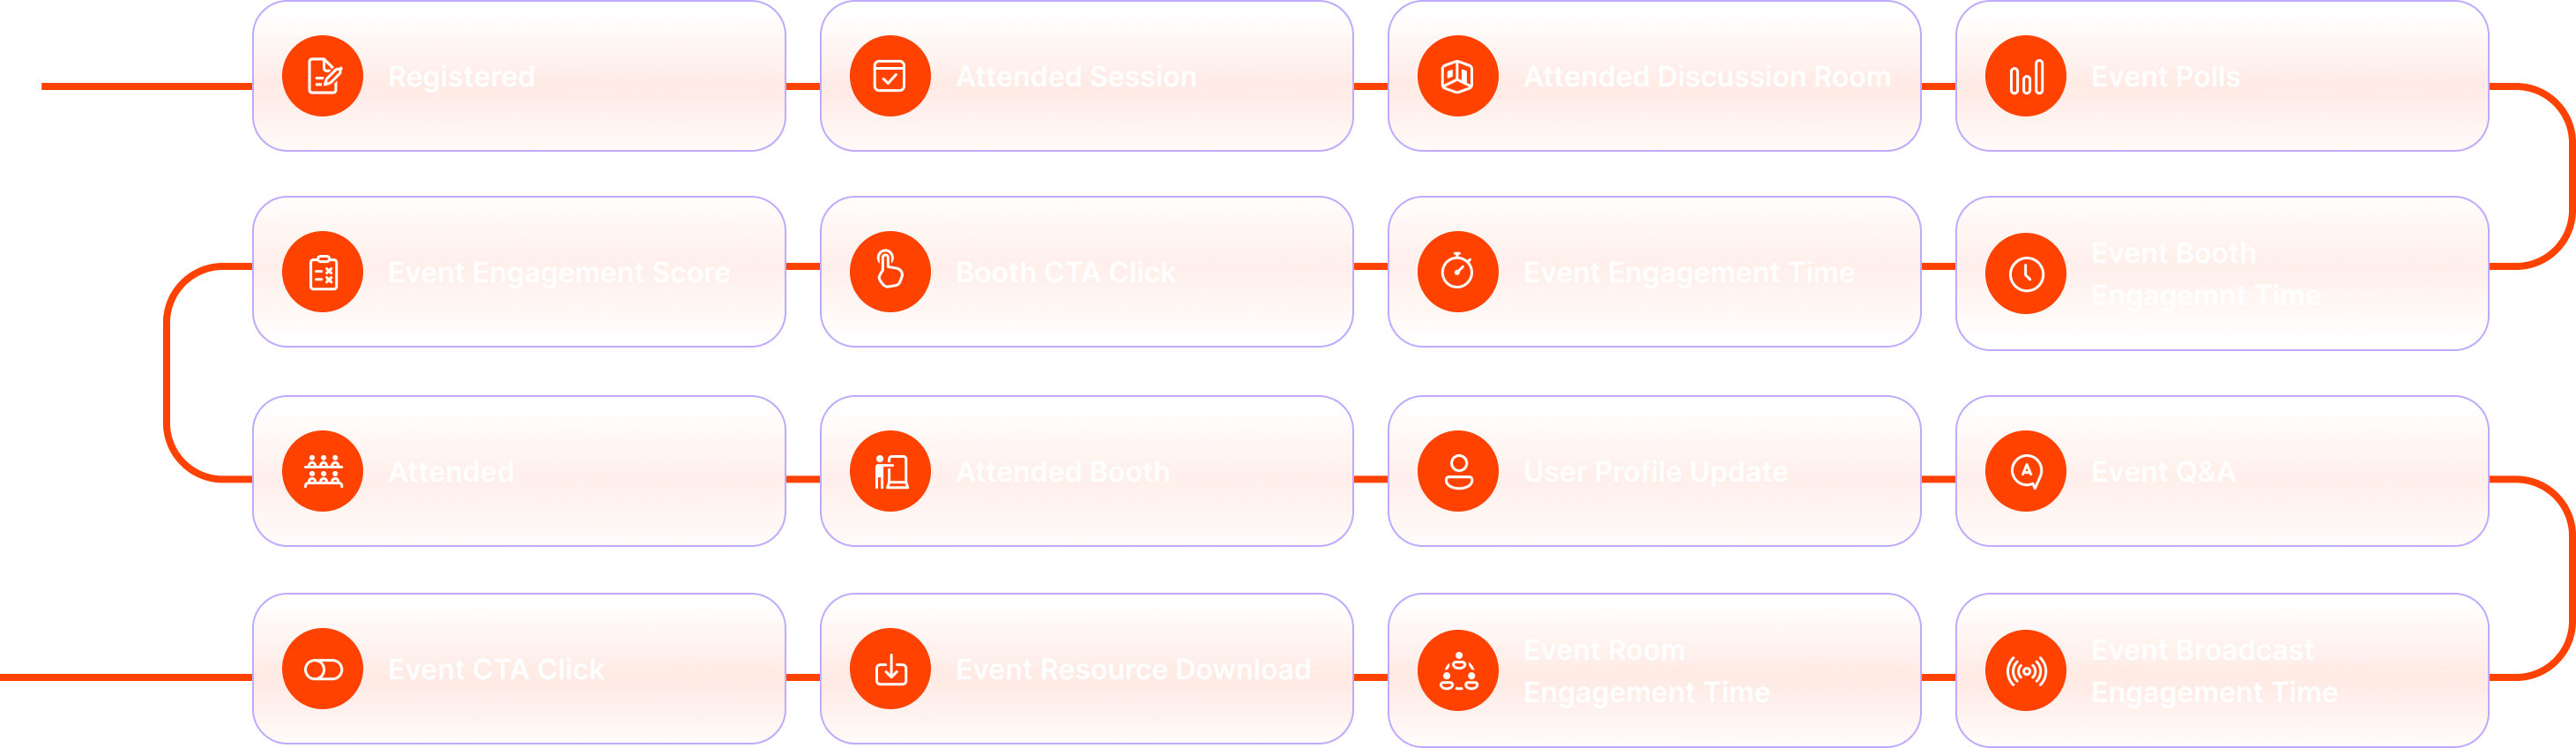 Event Attendee Insights